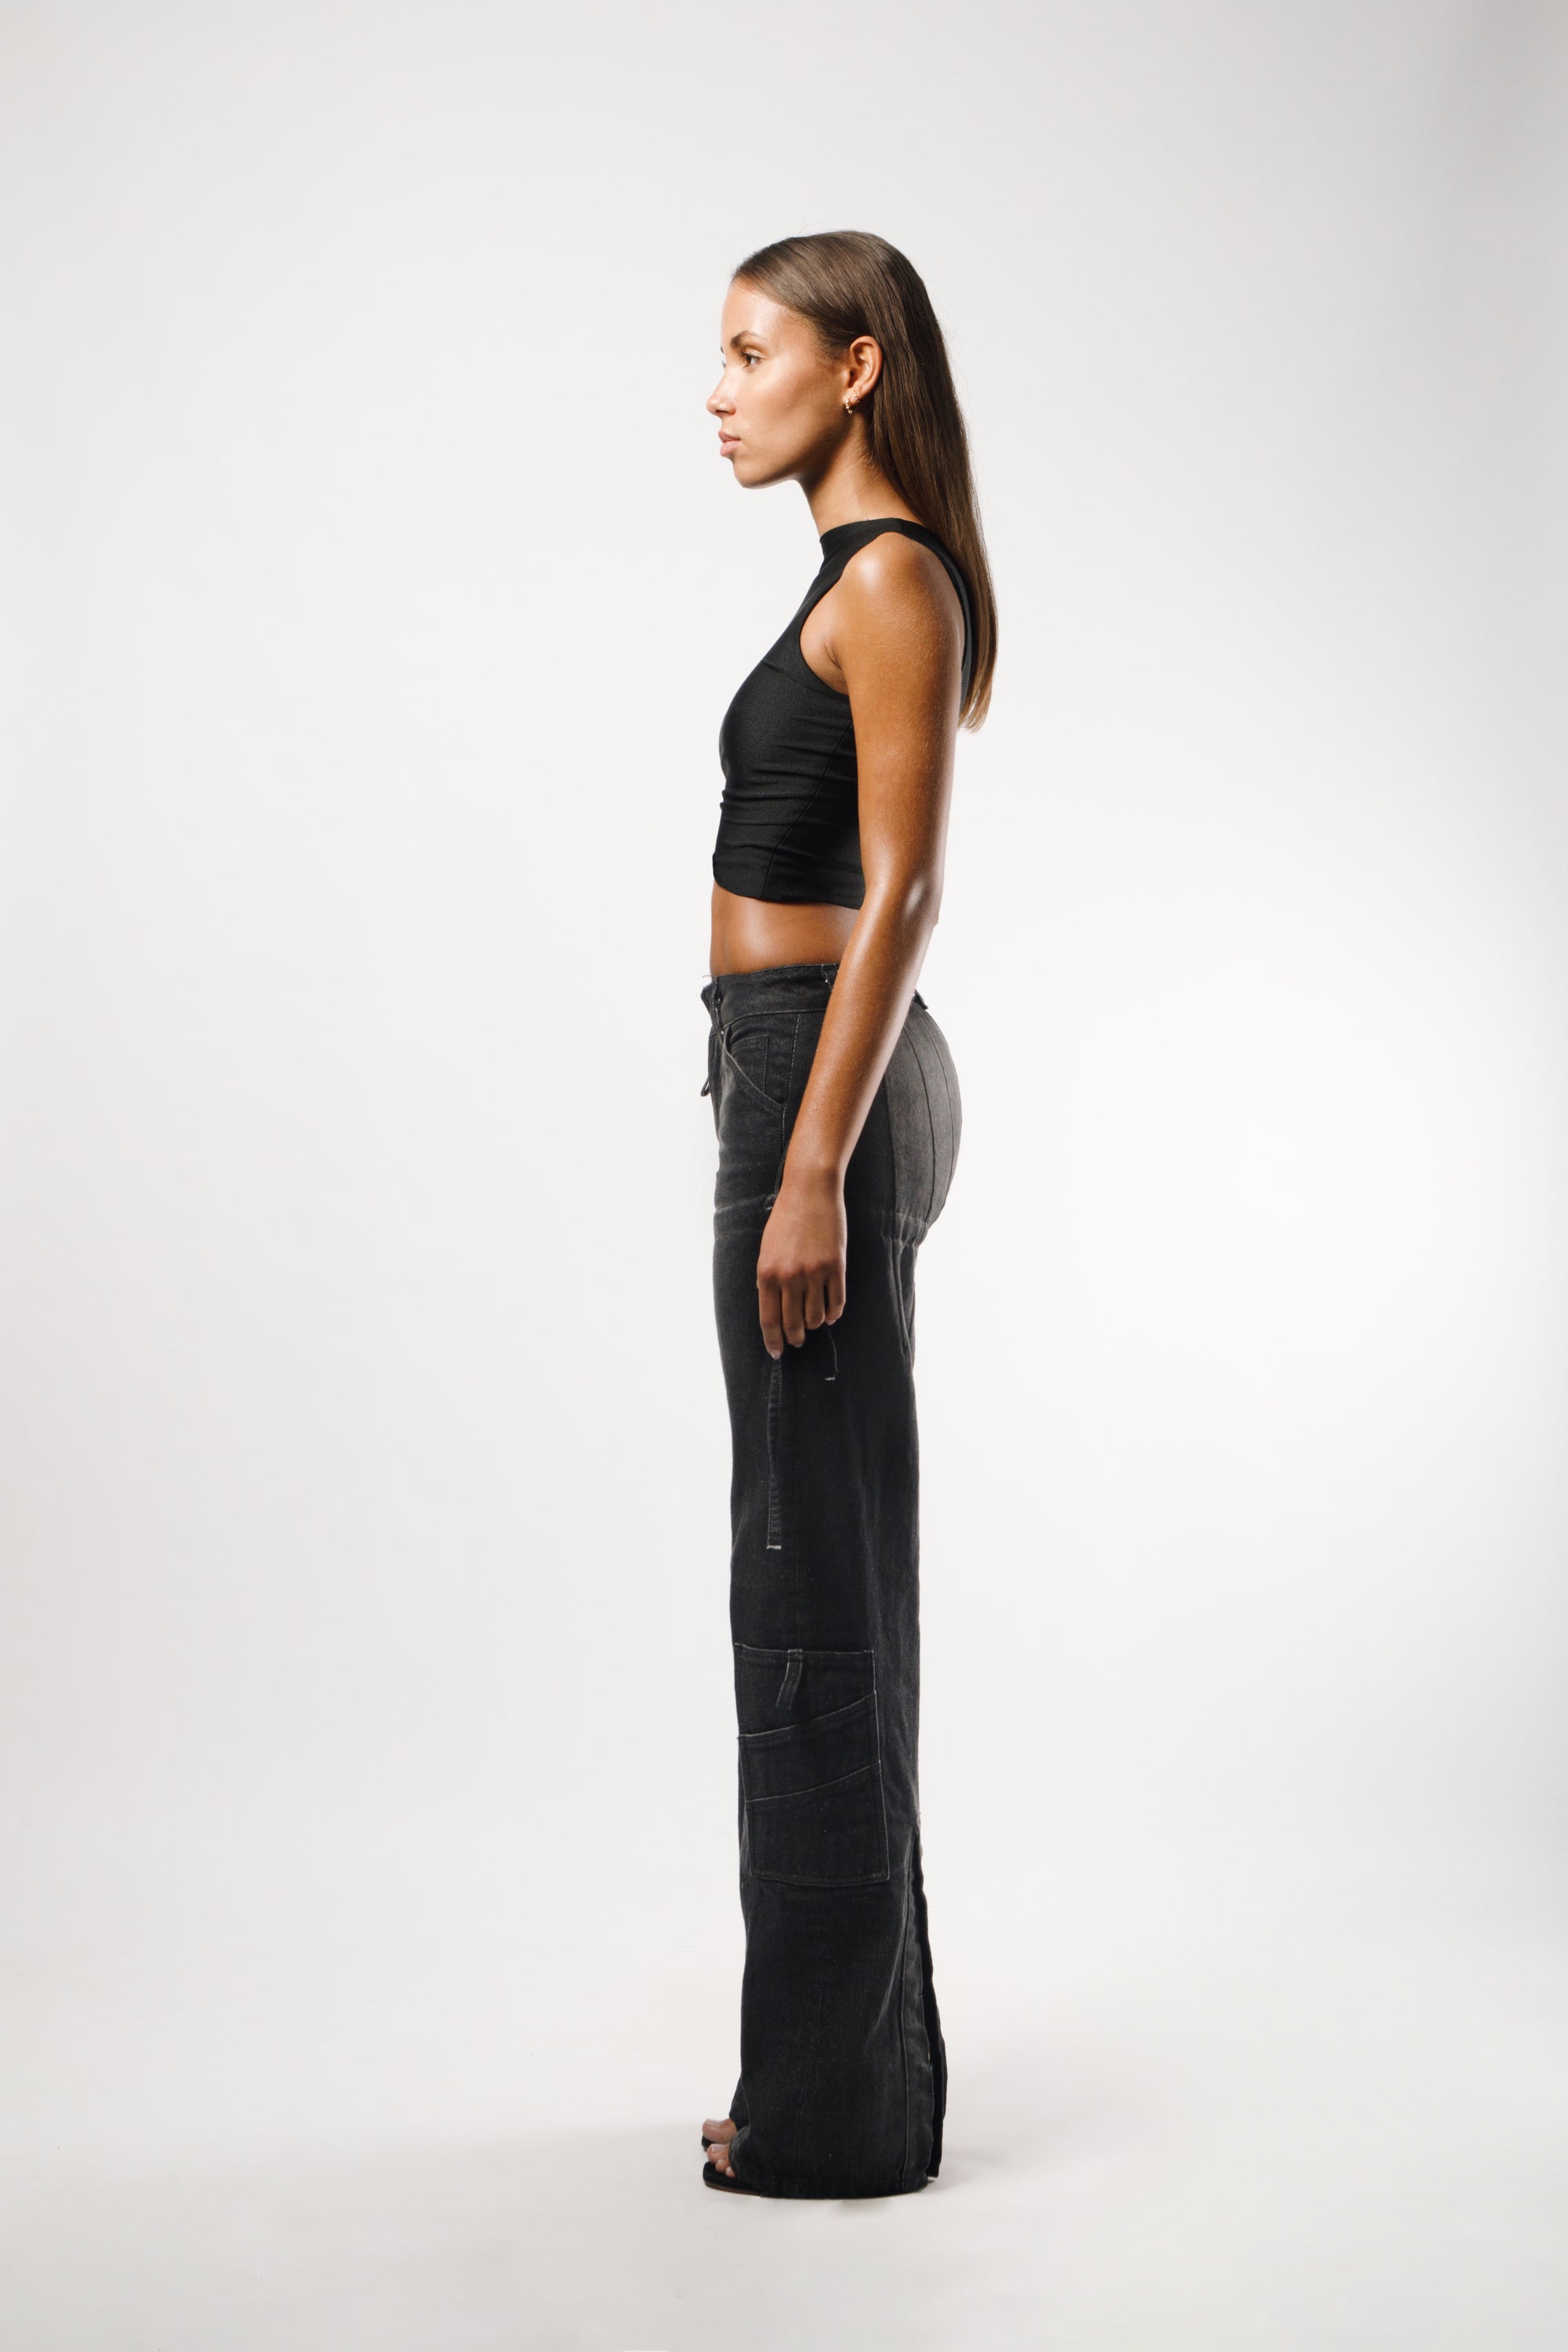 Long pants in washed black cotton with darts and opening slits on the back, adjustable cords to embellish the silhouette - side